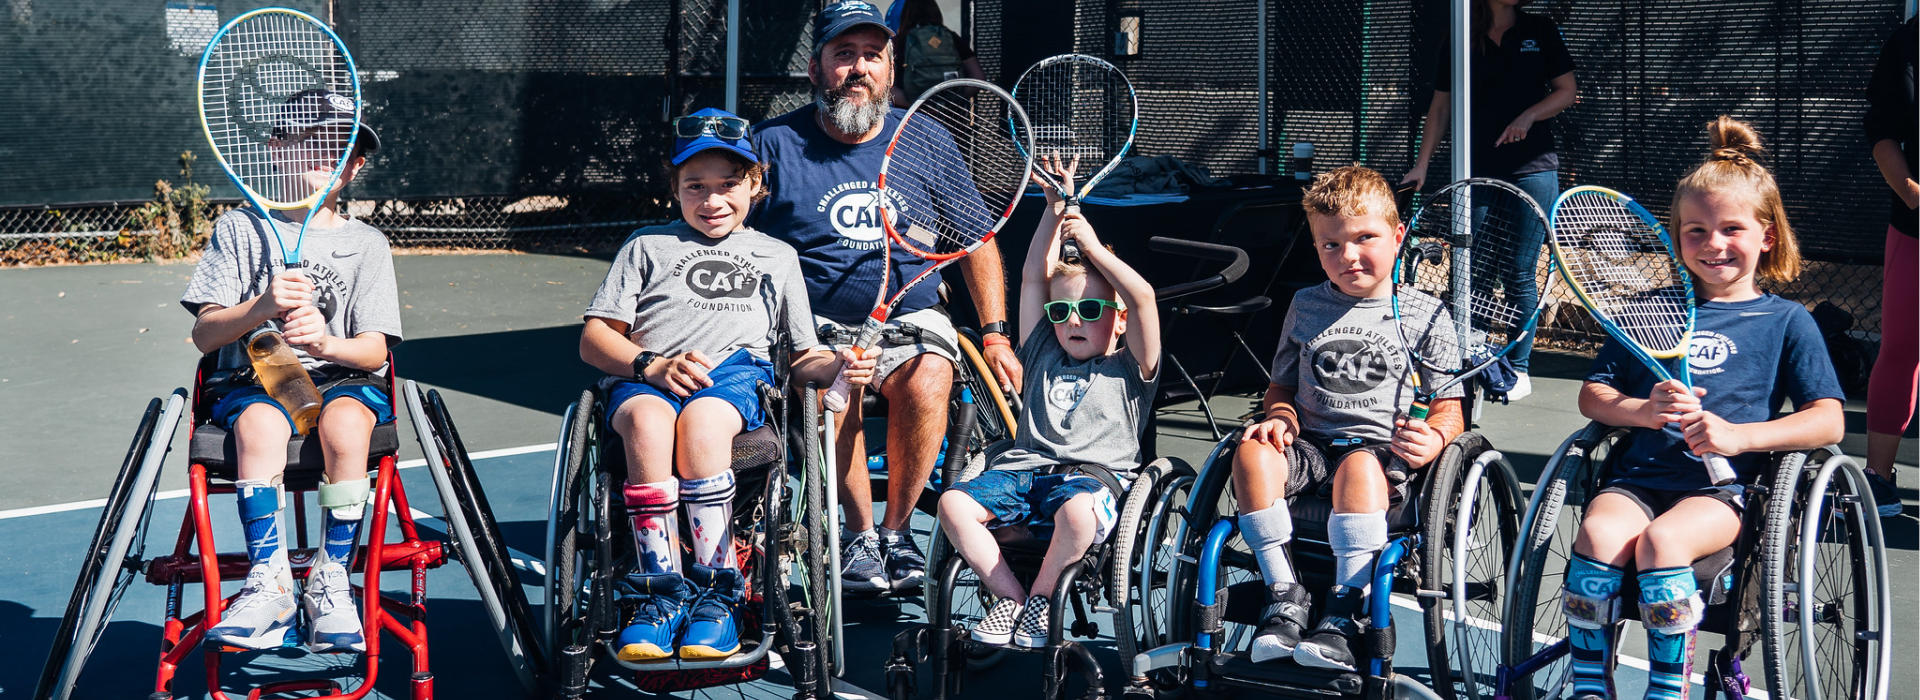 Idaho Tennis Clinic group shot of kids in wheelchairs with tennis rackets